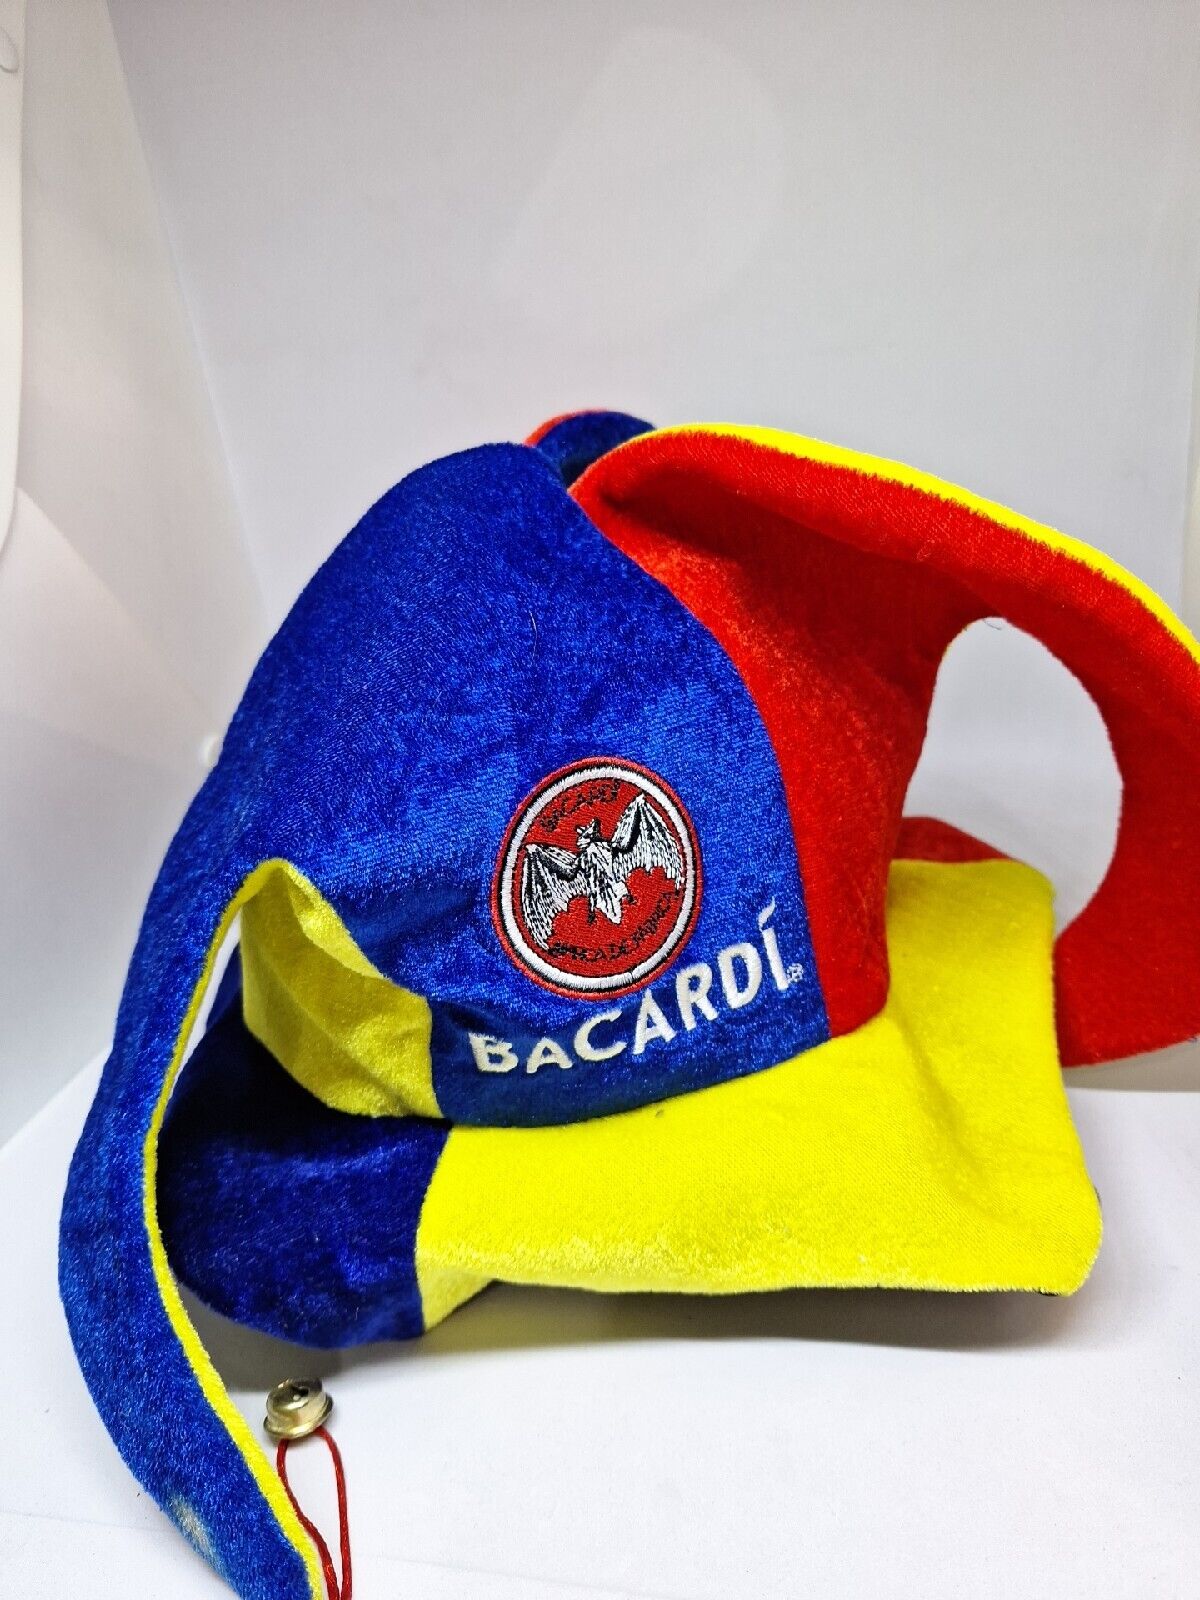 Bacardi Rum Jester Hat with Bell’s Red Yellow BlueWith Bells Bat Logo See Pics